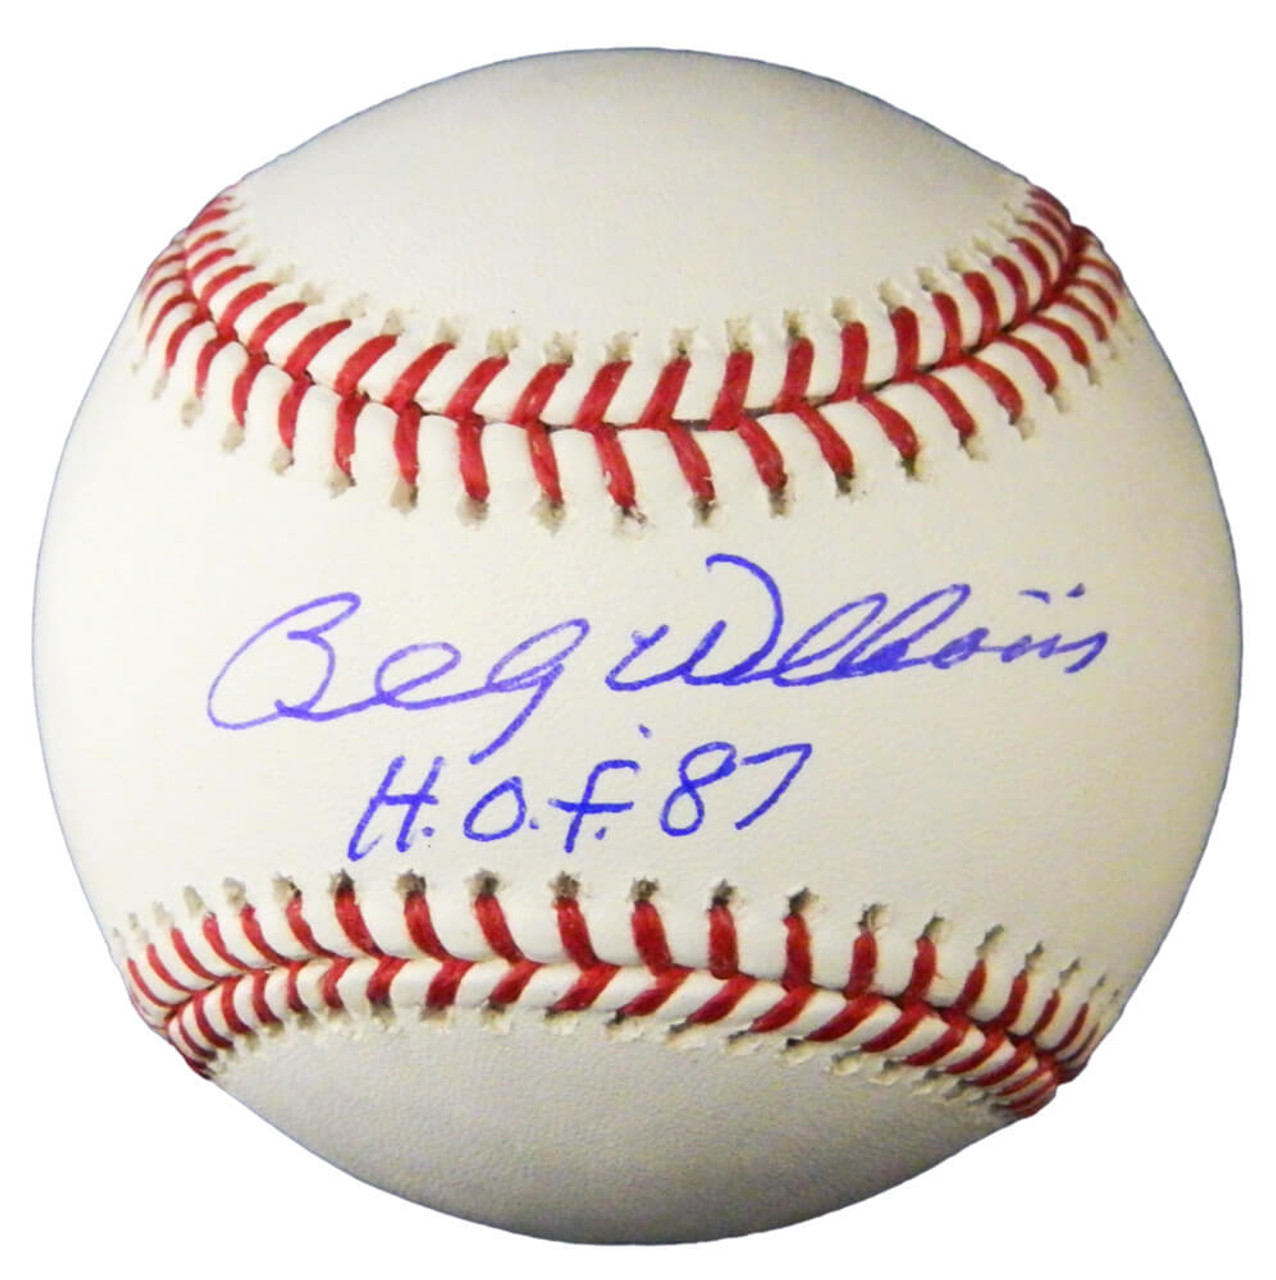 Billy Williams Signed Official MLB Baseball w/HOF'87 - Schwartz Authentic